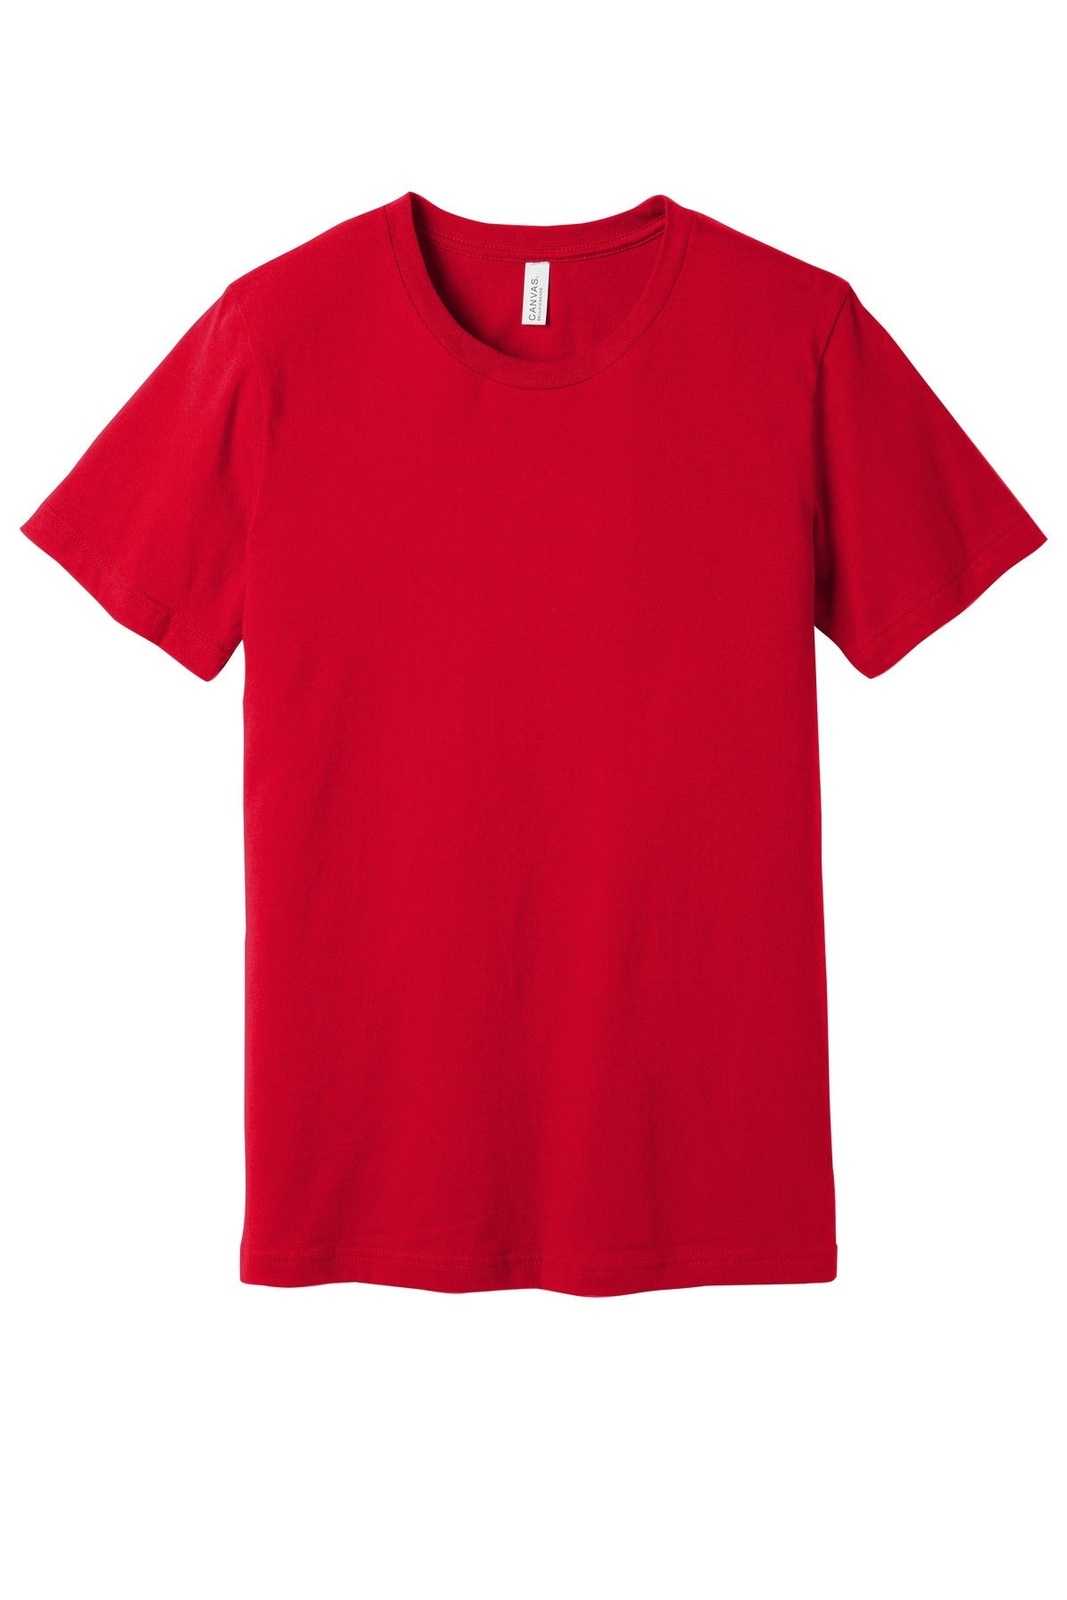 Bella + Canvas 3001 Unisex Jersey Short Sleeve Tee - Red - HIT a Double